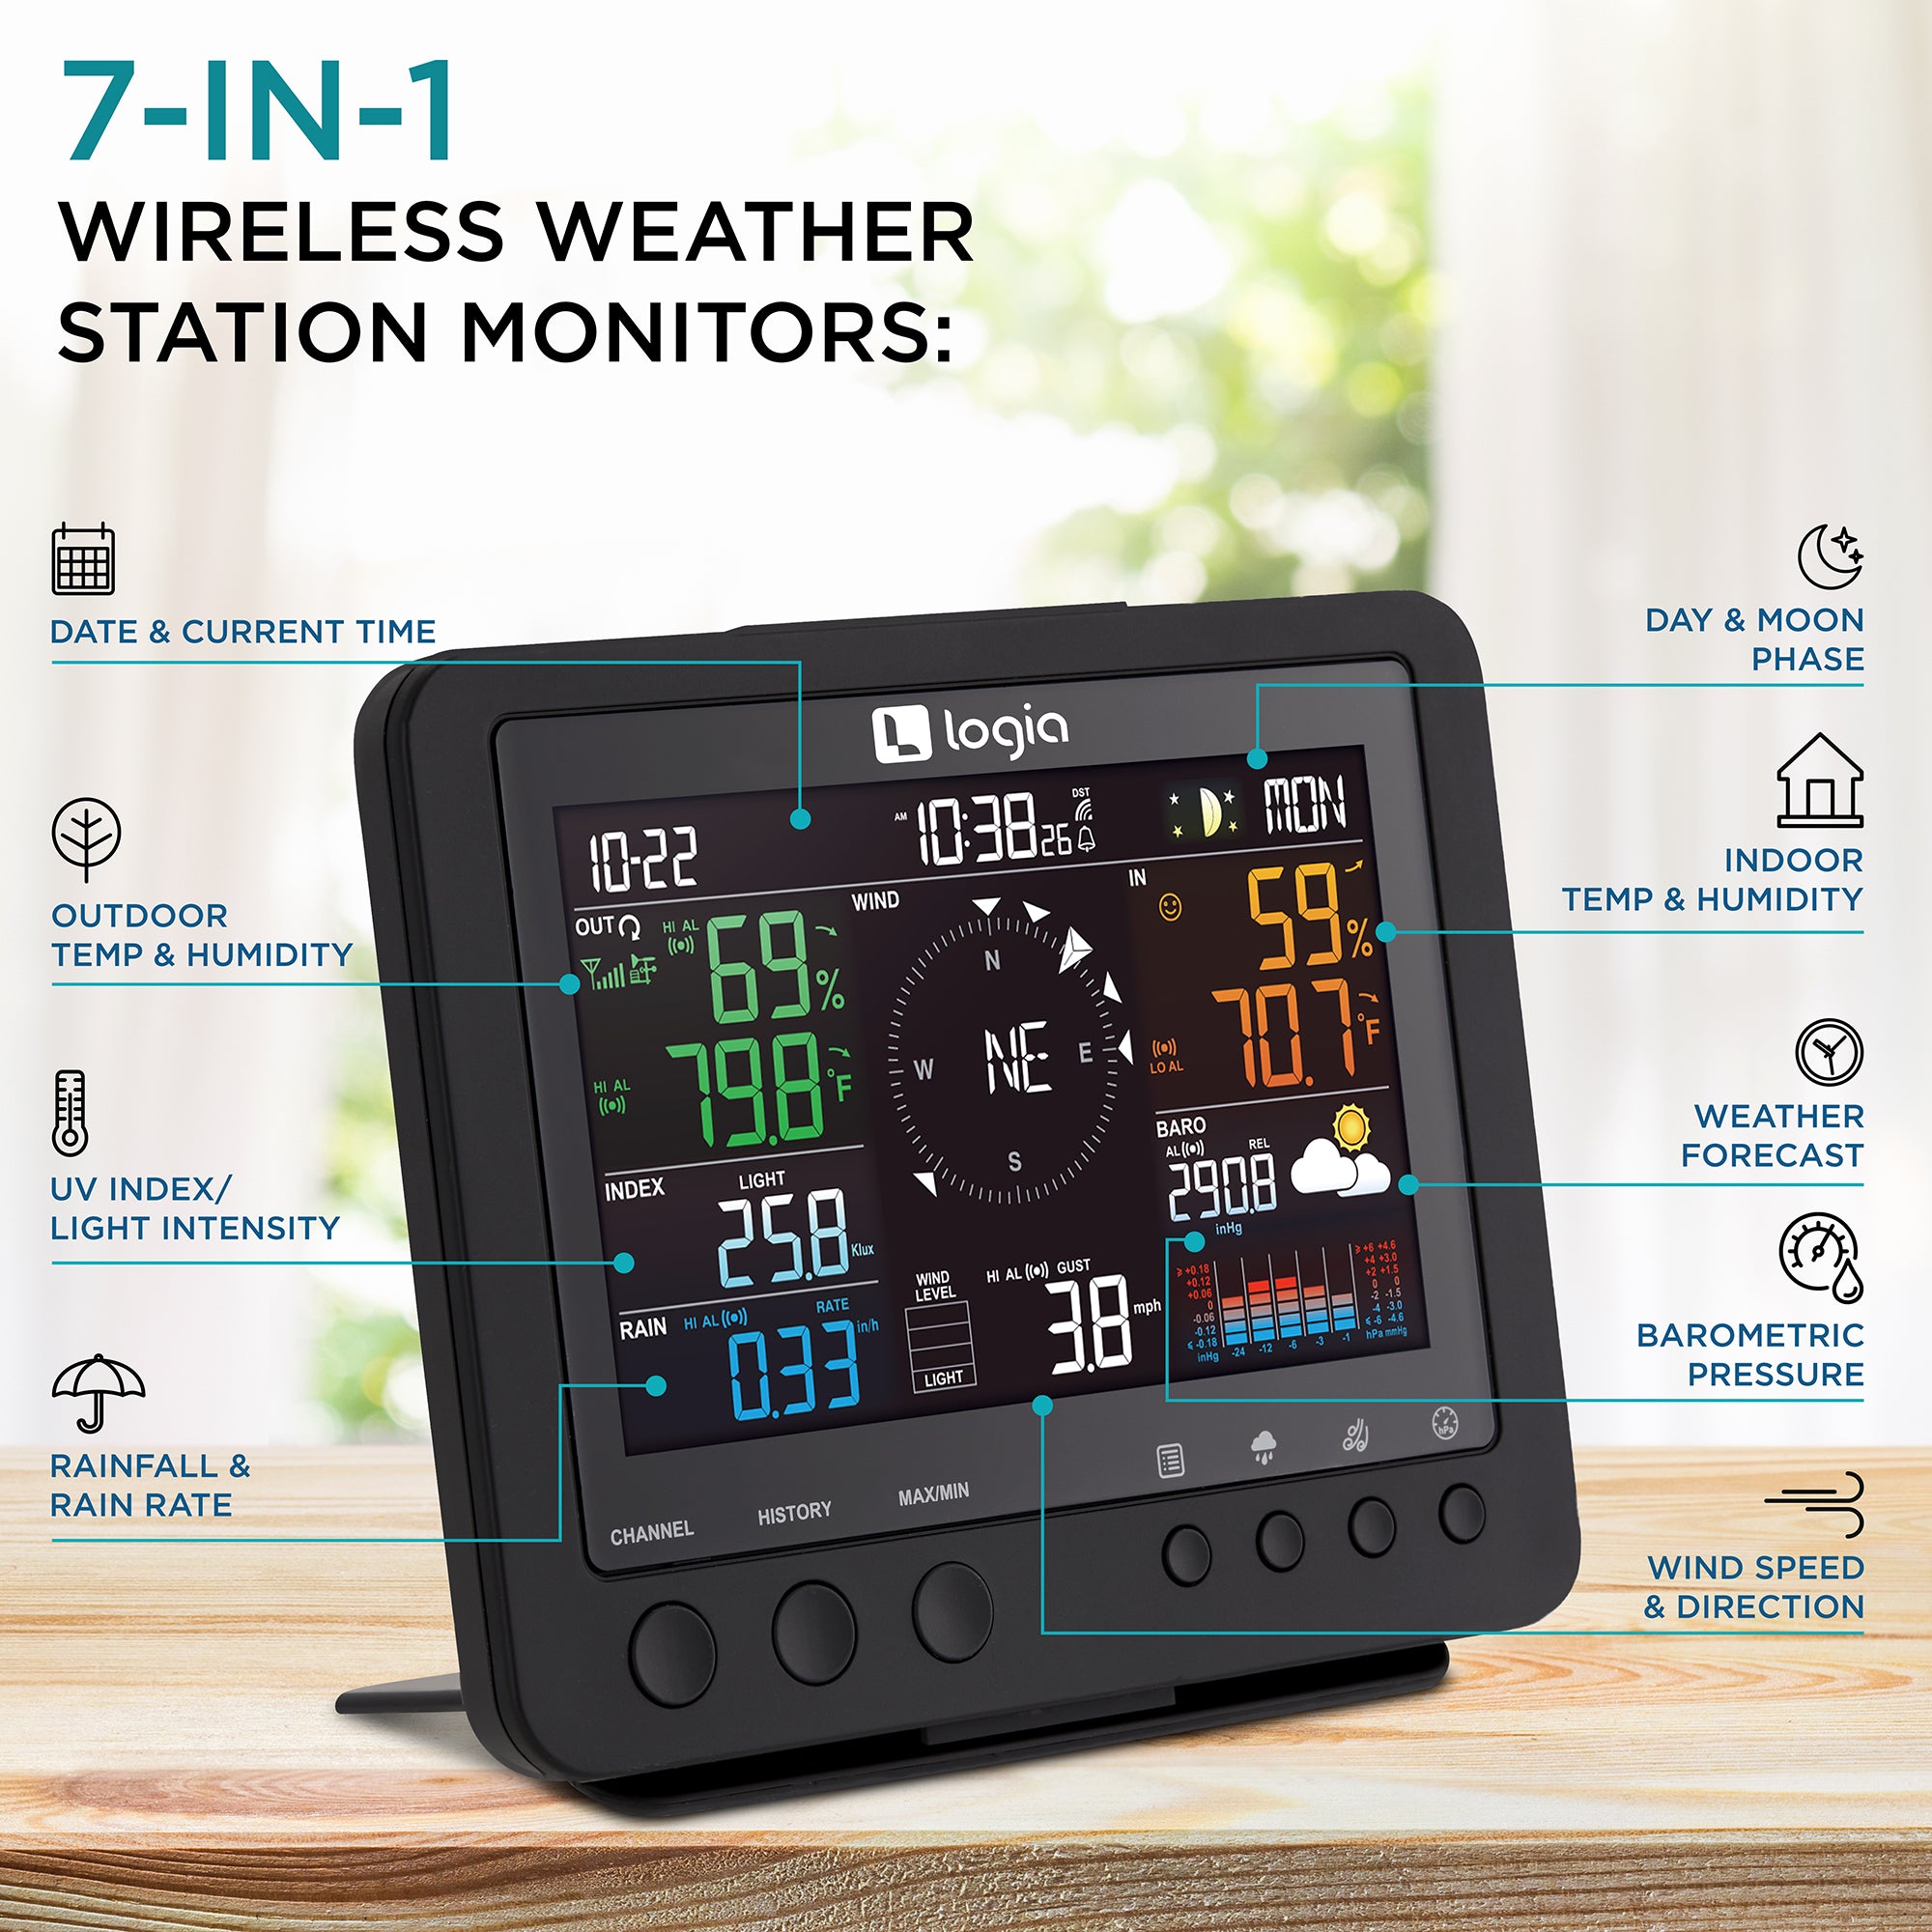 Ambient Weather 5.1'' Wireless Outdoor Weather Station